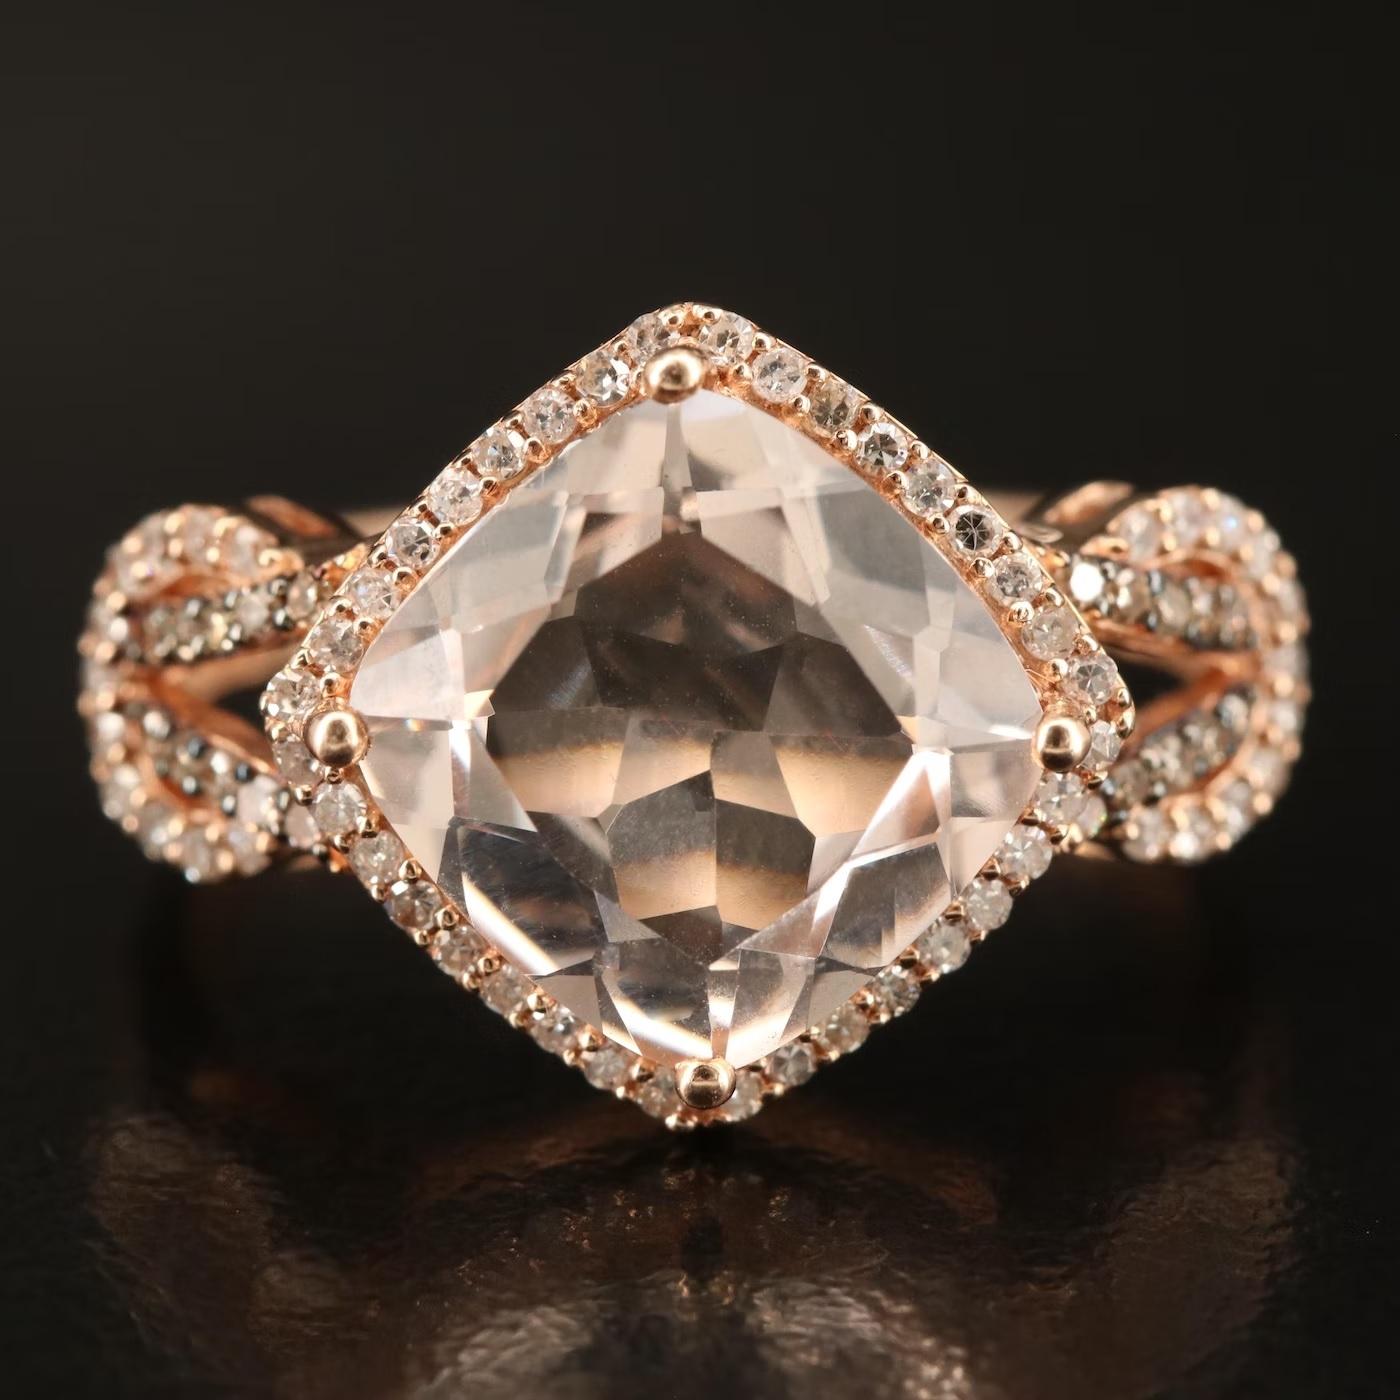 Designer EFFY Ring, Stamped and fully hallmarked

NEW with tags, Tag Price $4950

Amazing design, statement ring, head turner, Top Quality 

14K Rose gold, stamped 14K

3.65 Morganite and Diamond  

The ring is size 7 US size and can be re-sized by